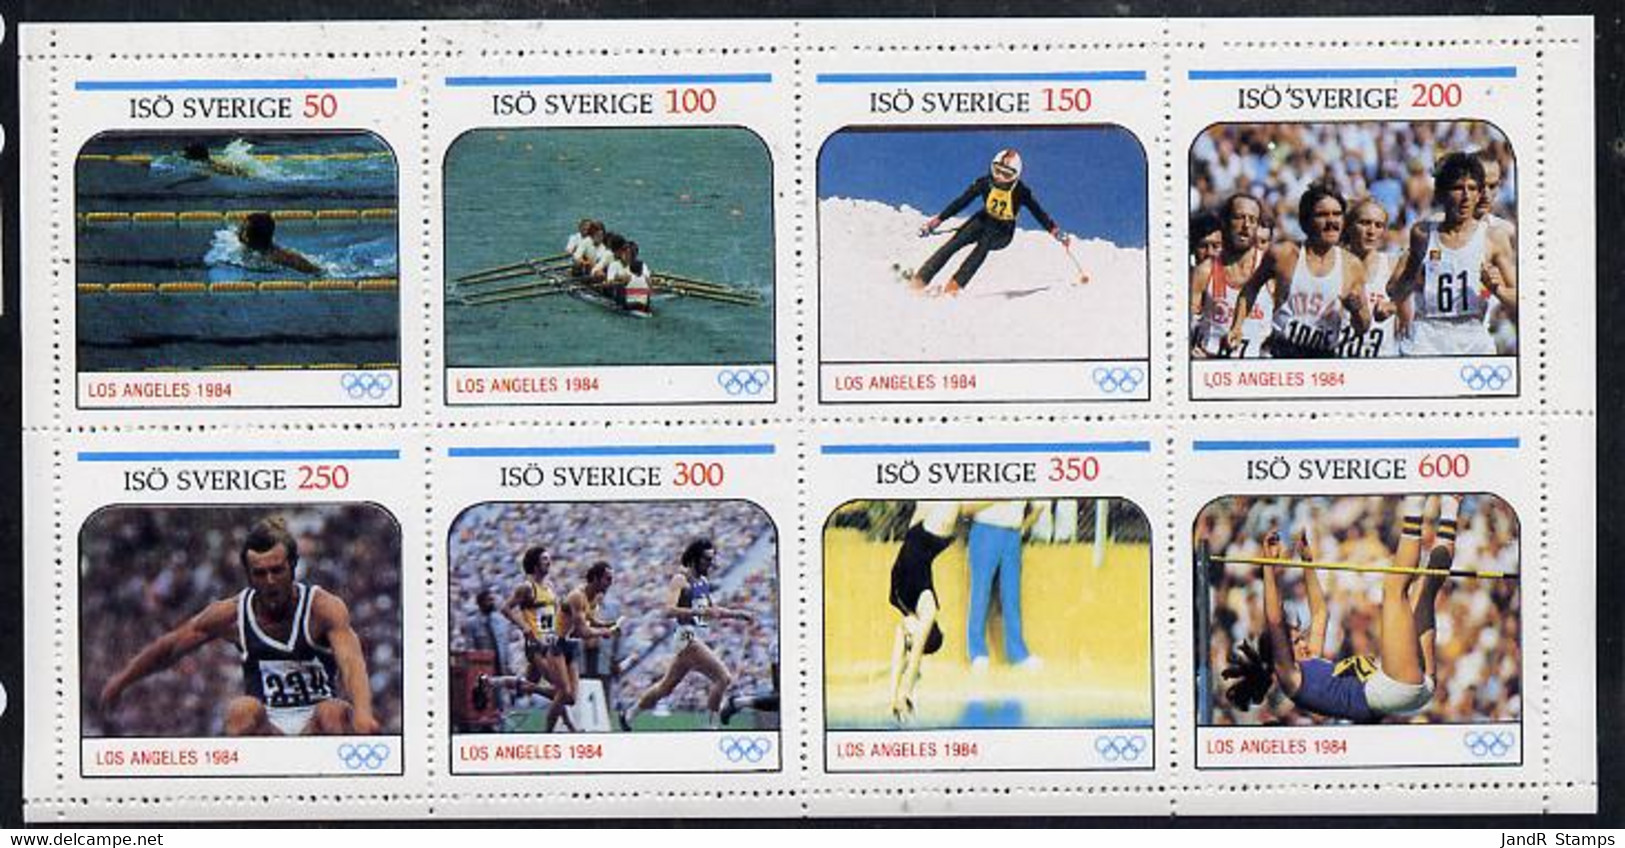 Iso - Sweden 1984 Los Angeles Olympic Games Perf  Set Of 8 Values (50 To 600) MNH - Local Post Stamps